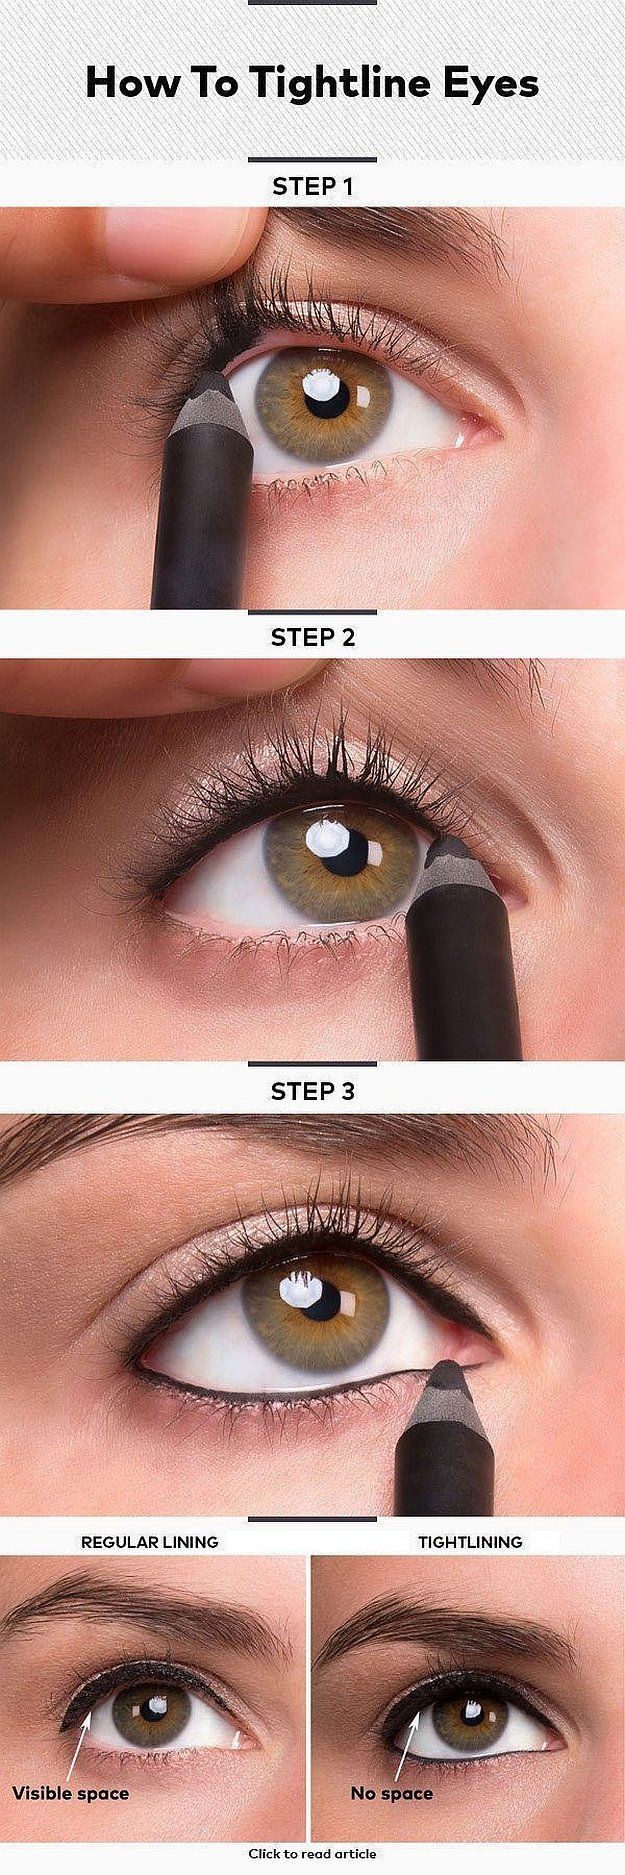 Tightlining 101: Make Your Eyes Bigger & Brighter With This Simple Trick